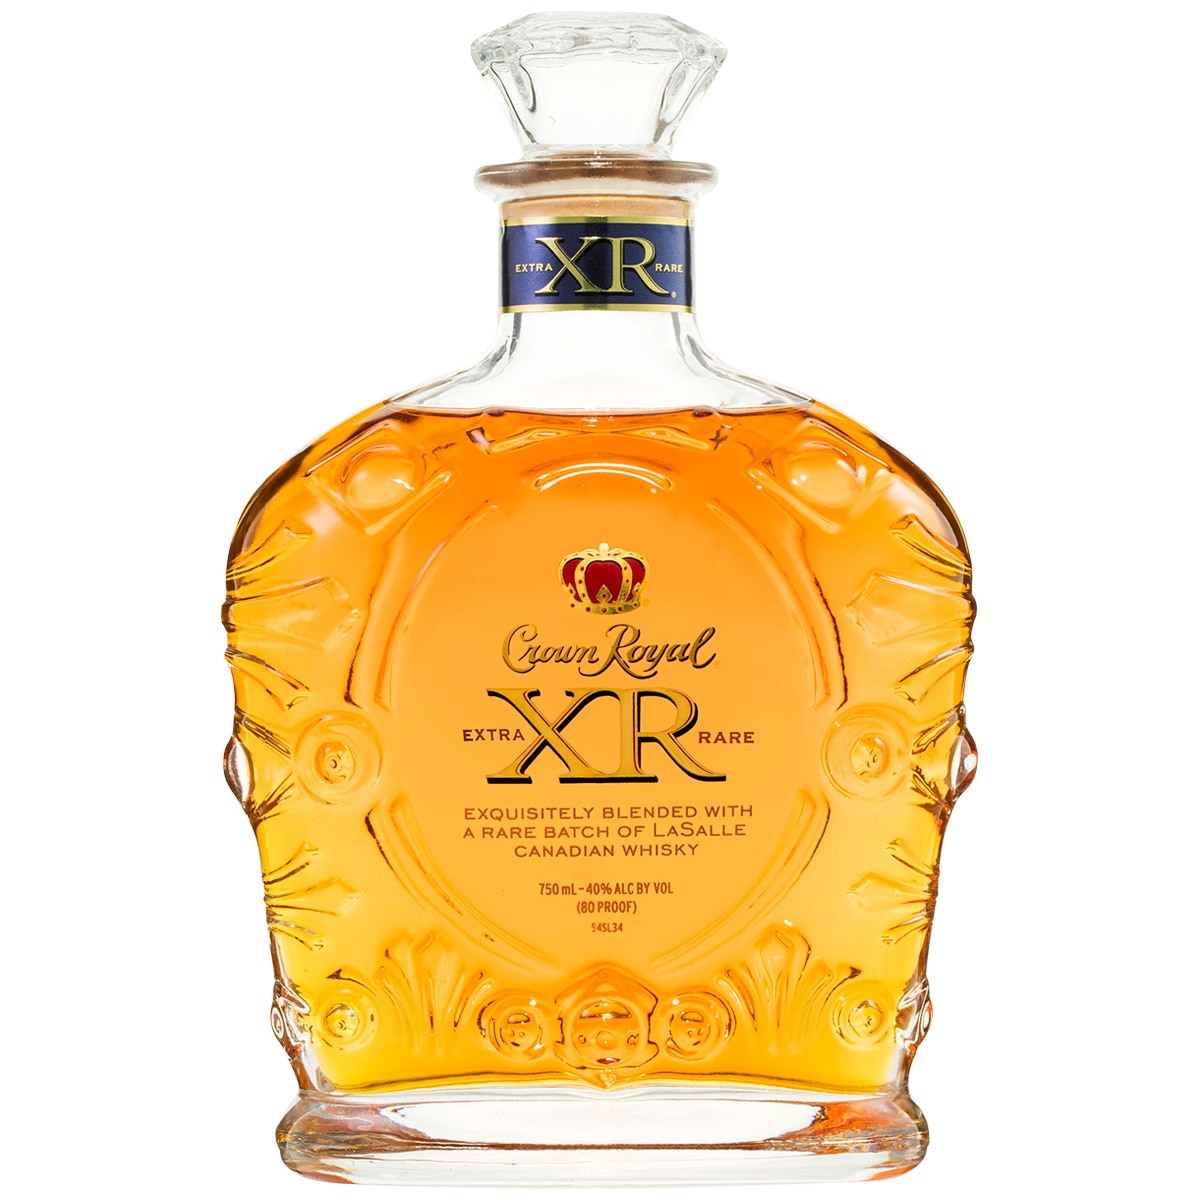 Crown Royal XO Canadian Whisky – Internet Wines.com